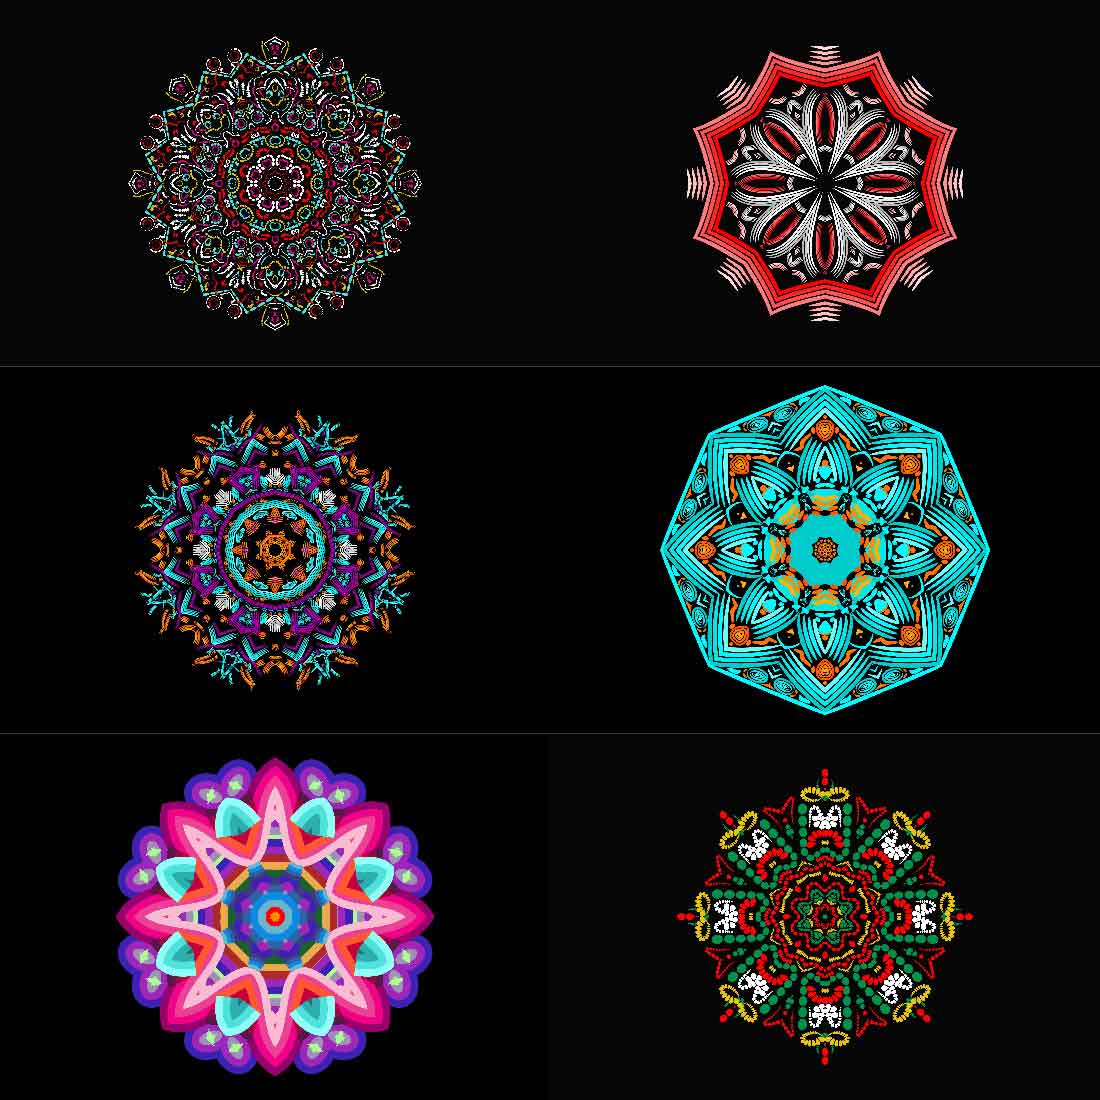 A selection of charming images of geometric mandalas